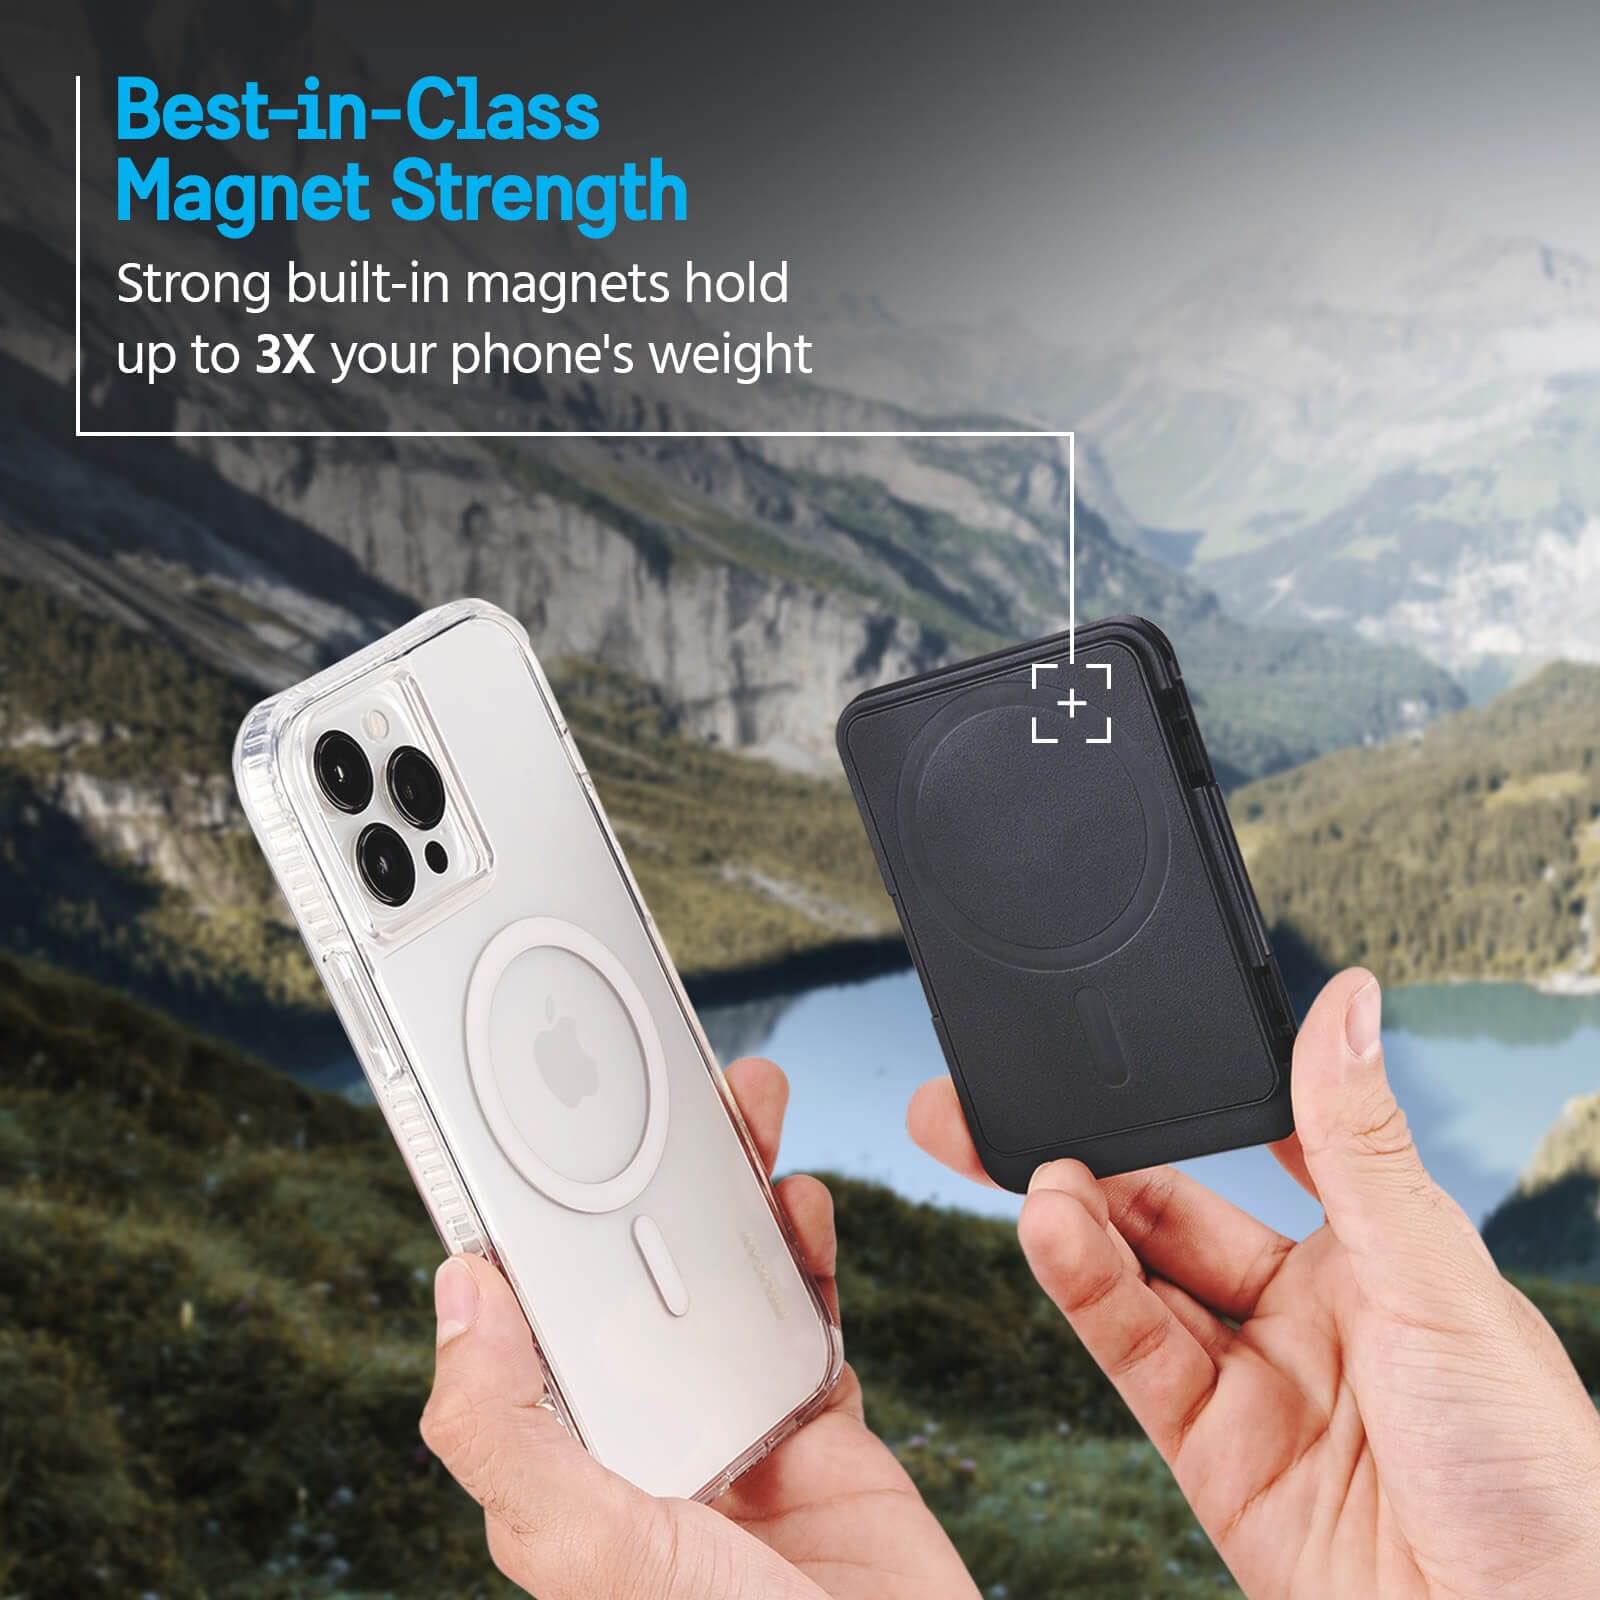 BEst-in-class Magnet Strength. Strong built-in magnets hold up to 3x your phone's weight. color::Black